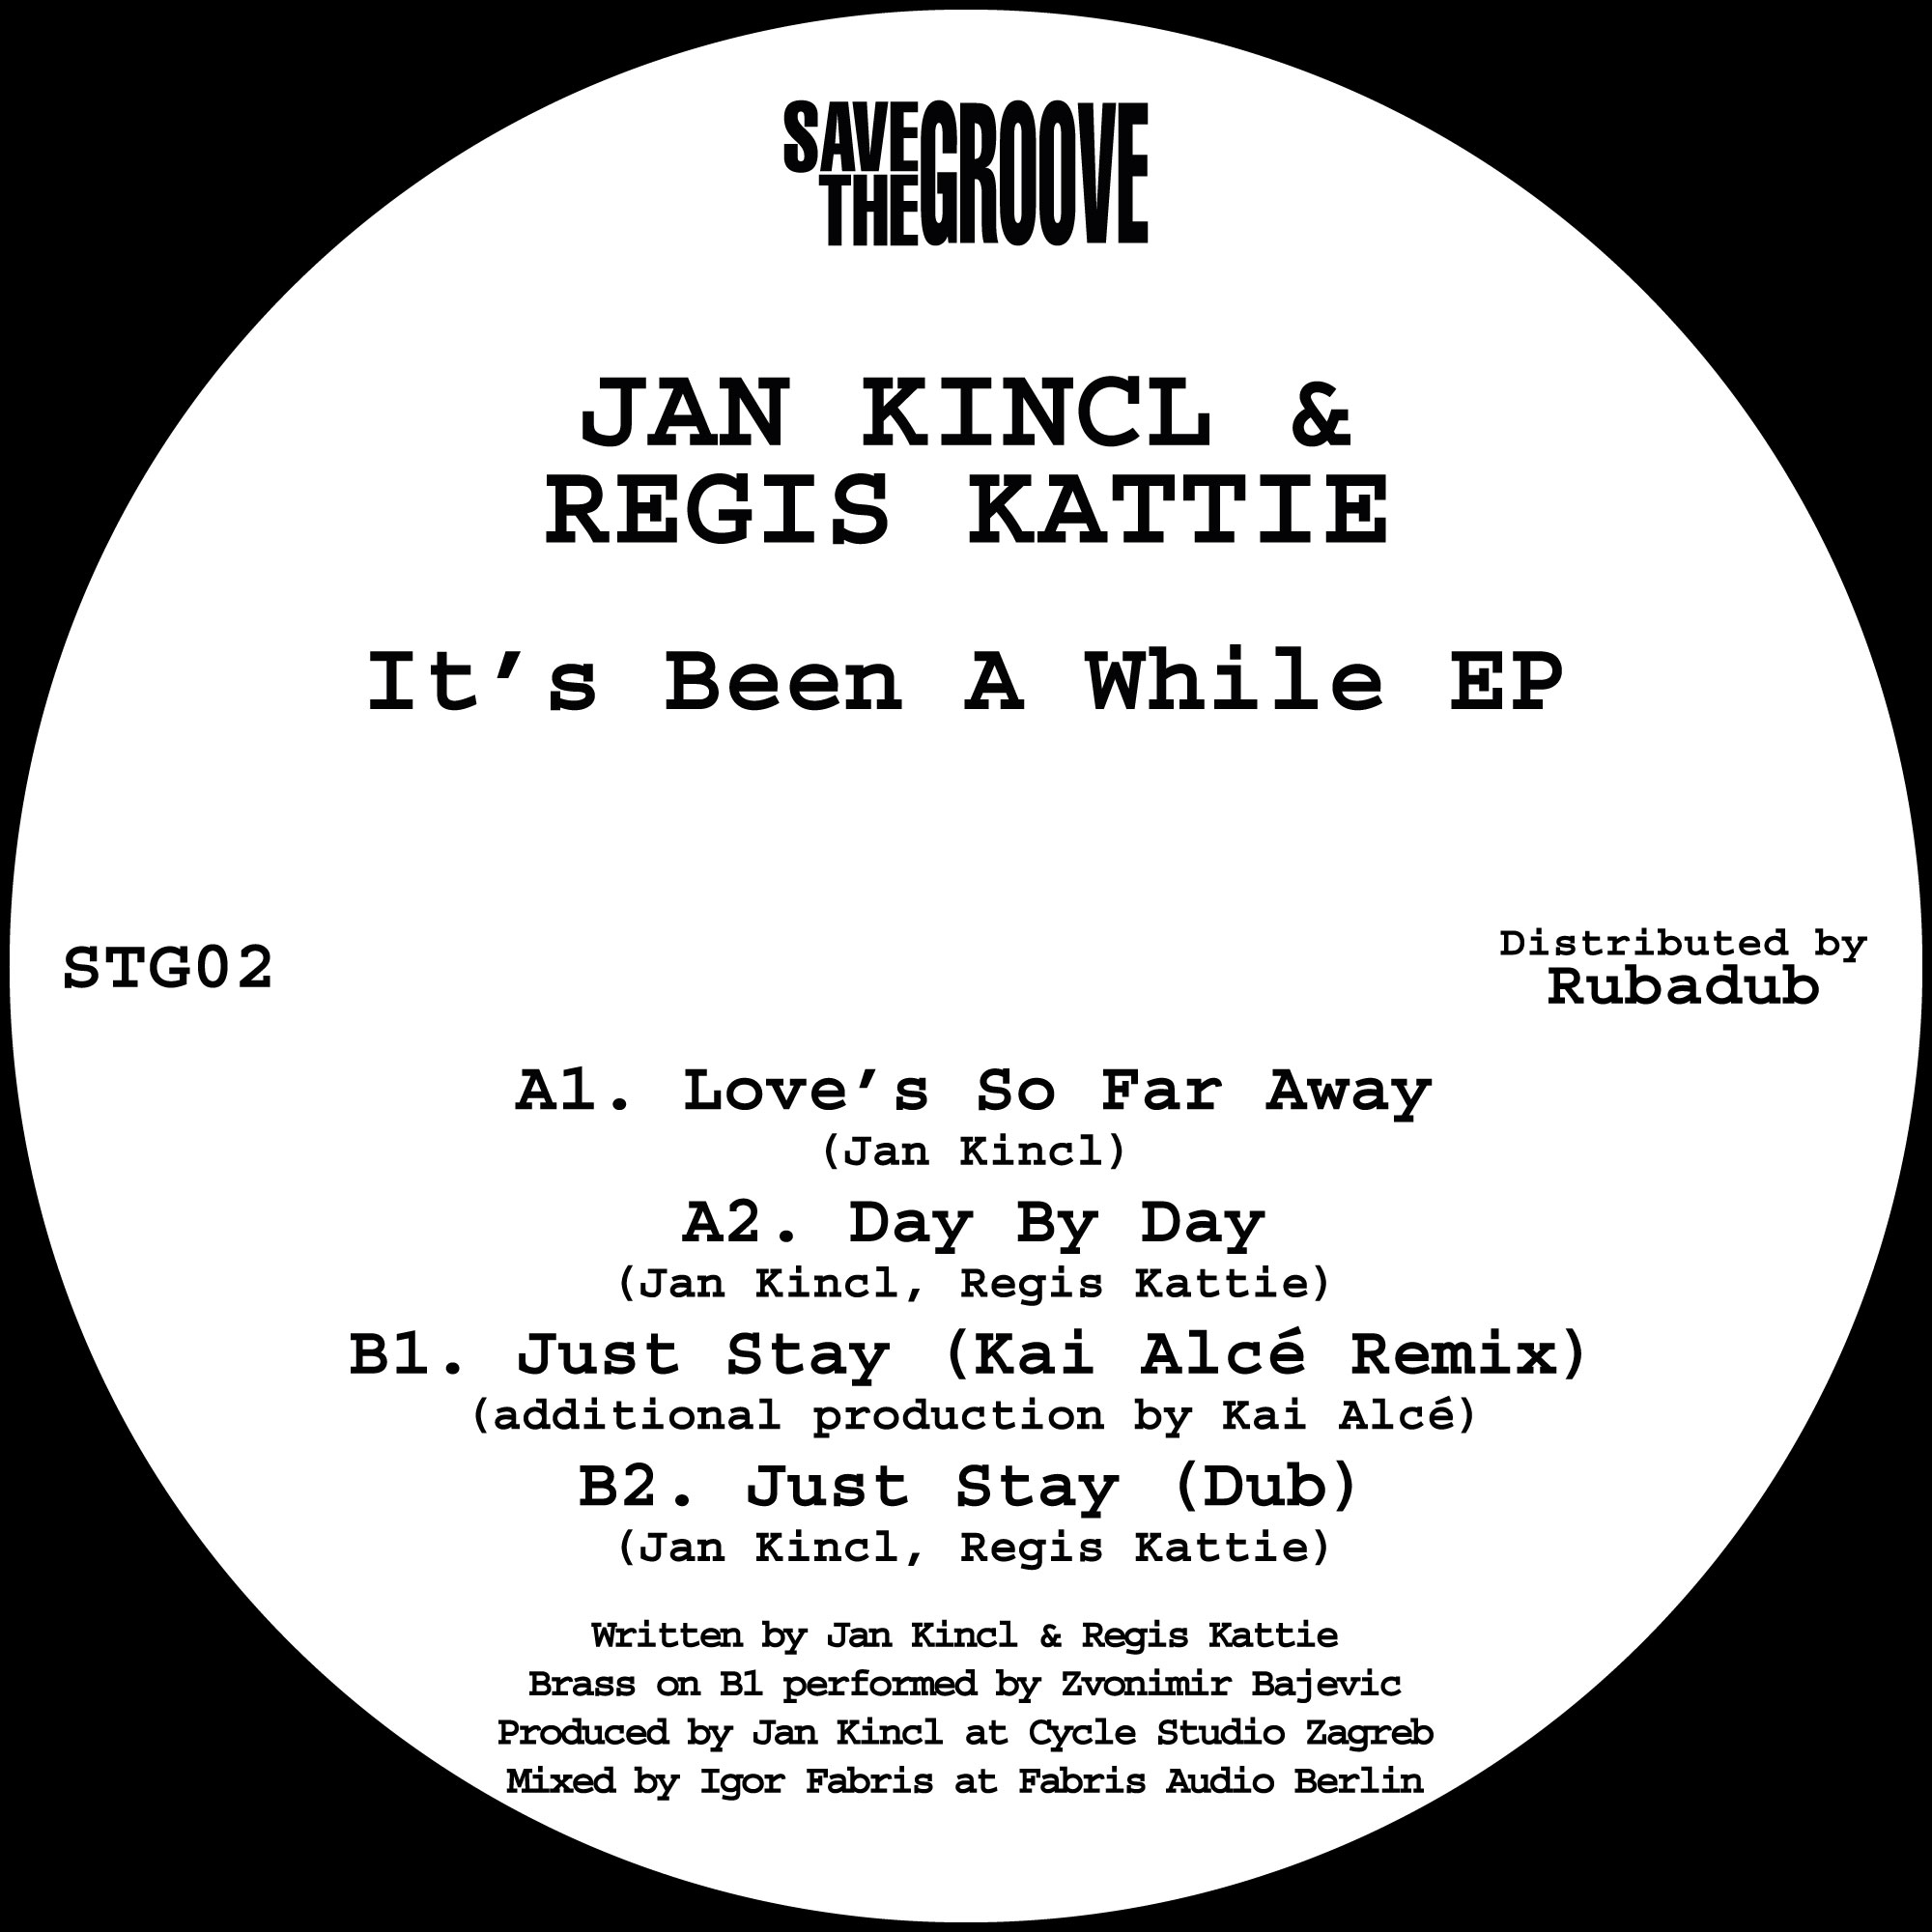 ITS BEEN A WHILE EP (inc. KAI ALCE REMIX)